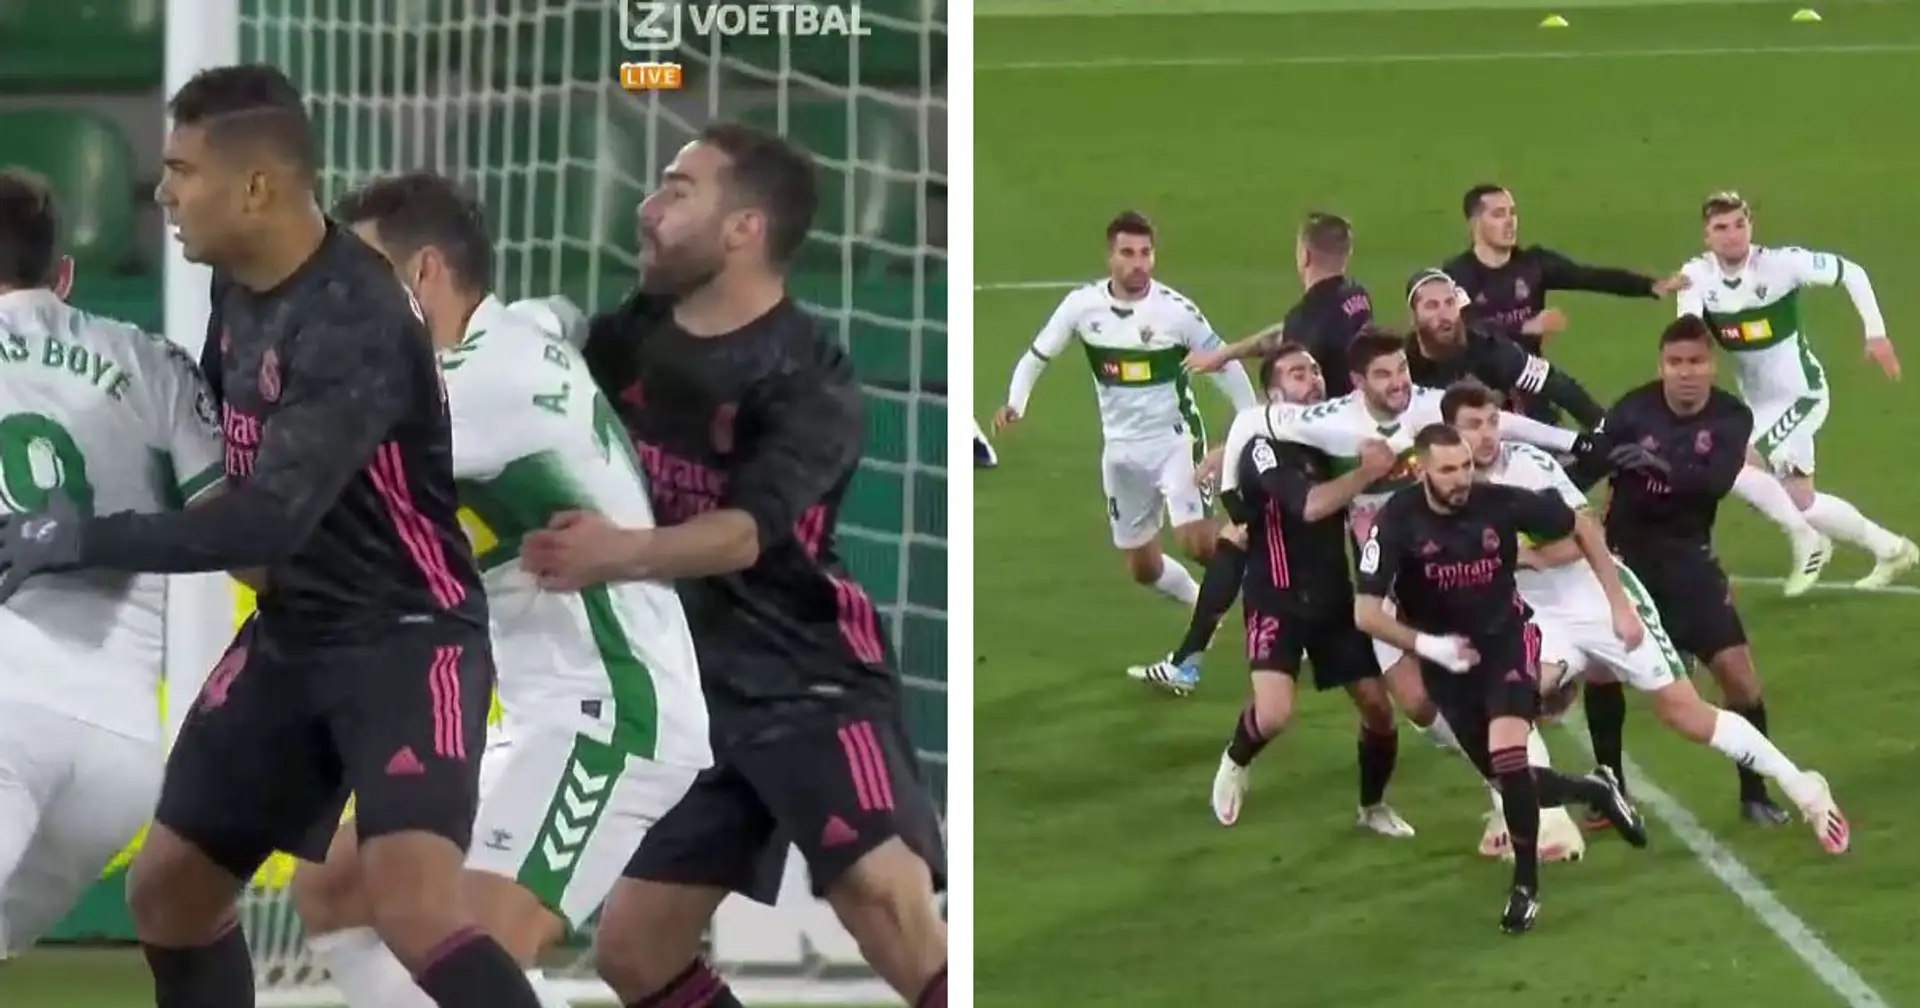 Fans can't believe their eyes as otherwise solid Carvajal gives away 'stupid' penalty vs Elche